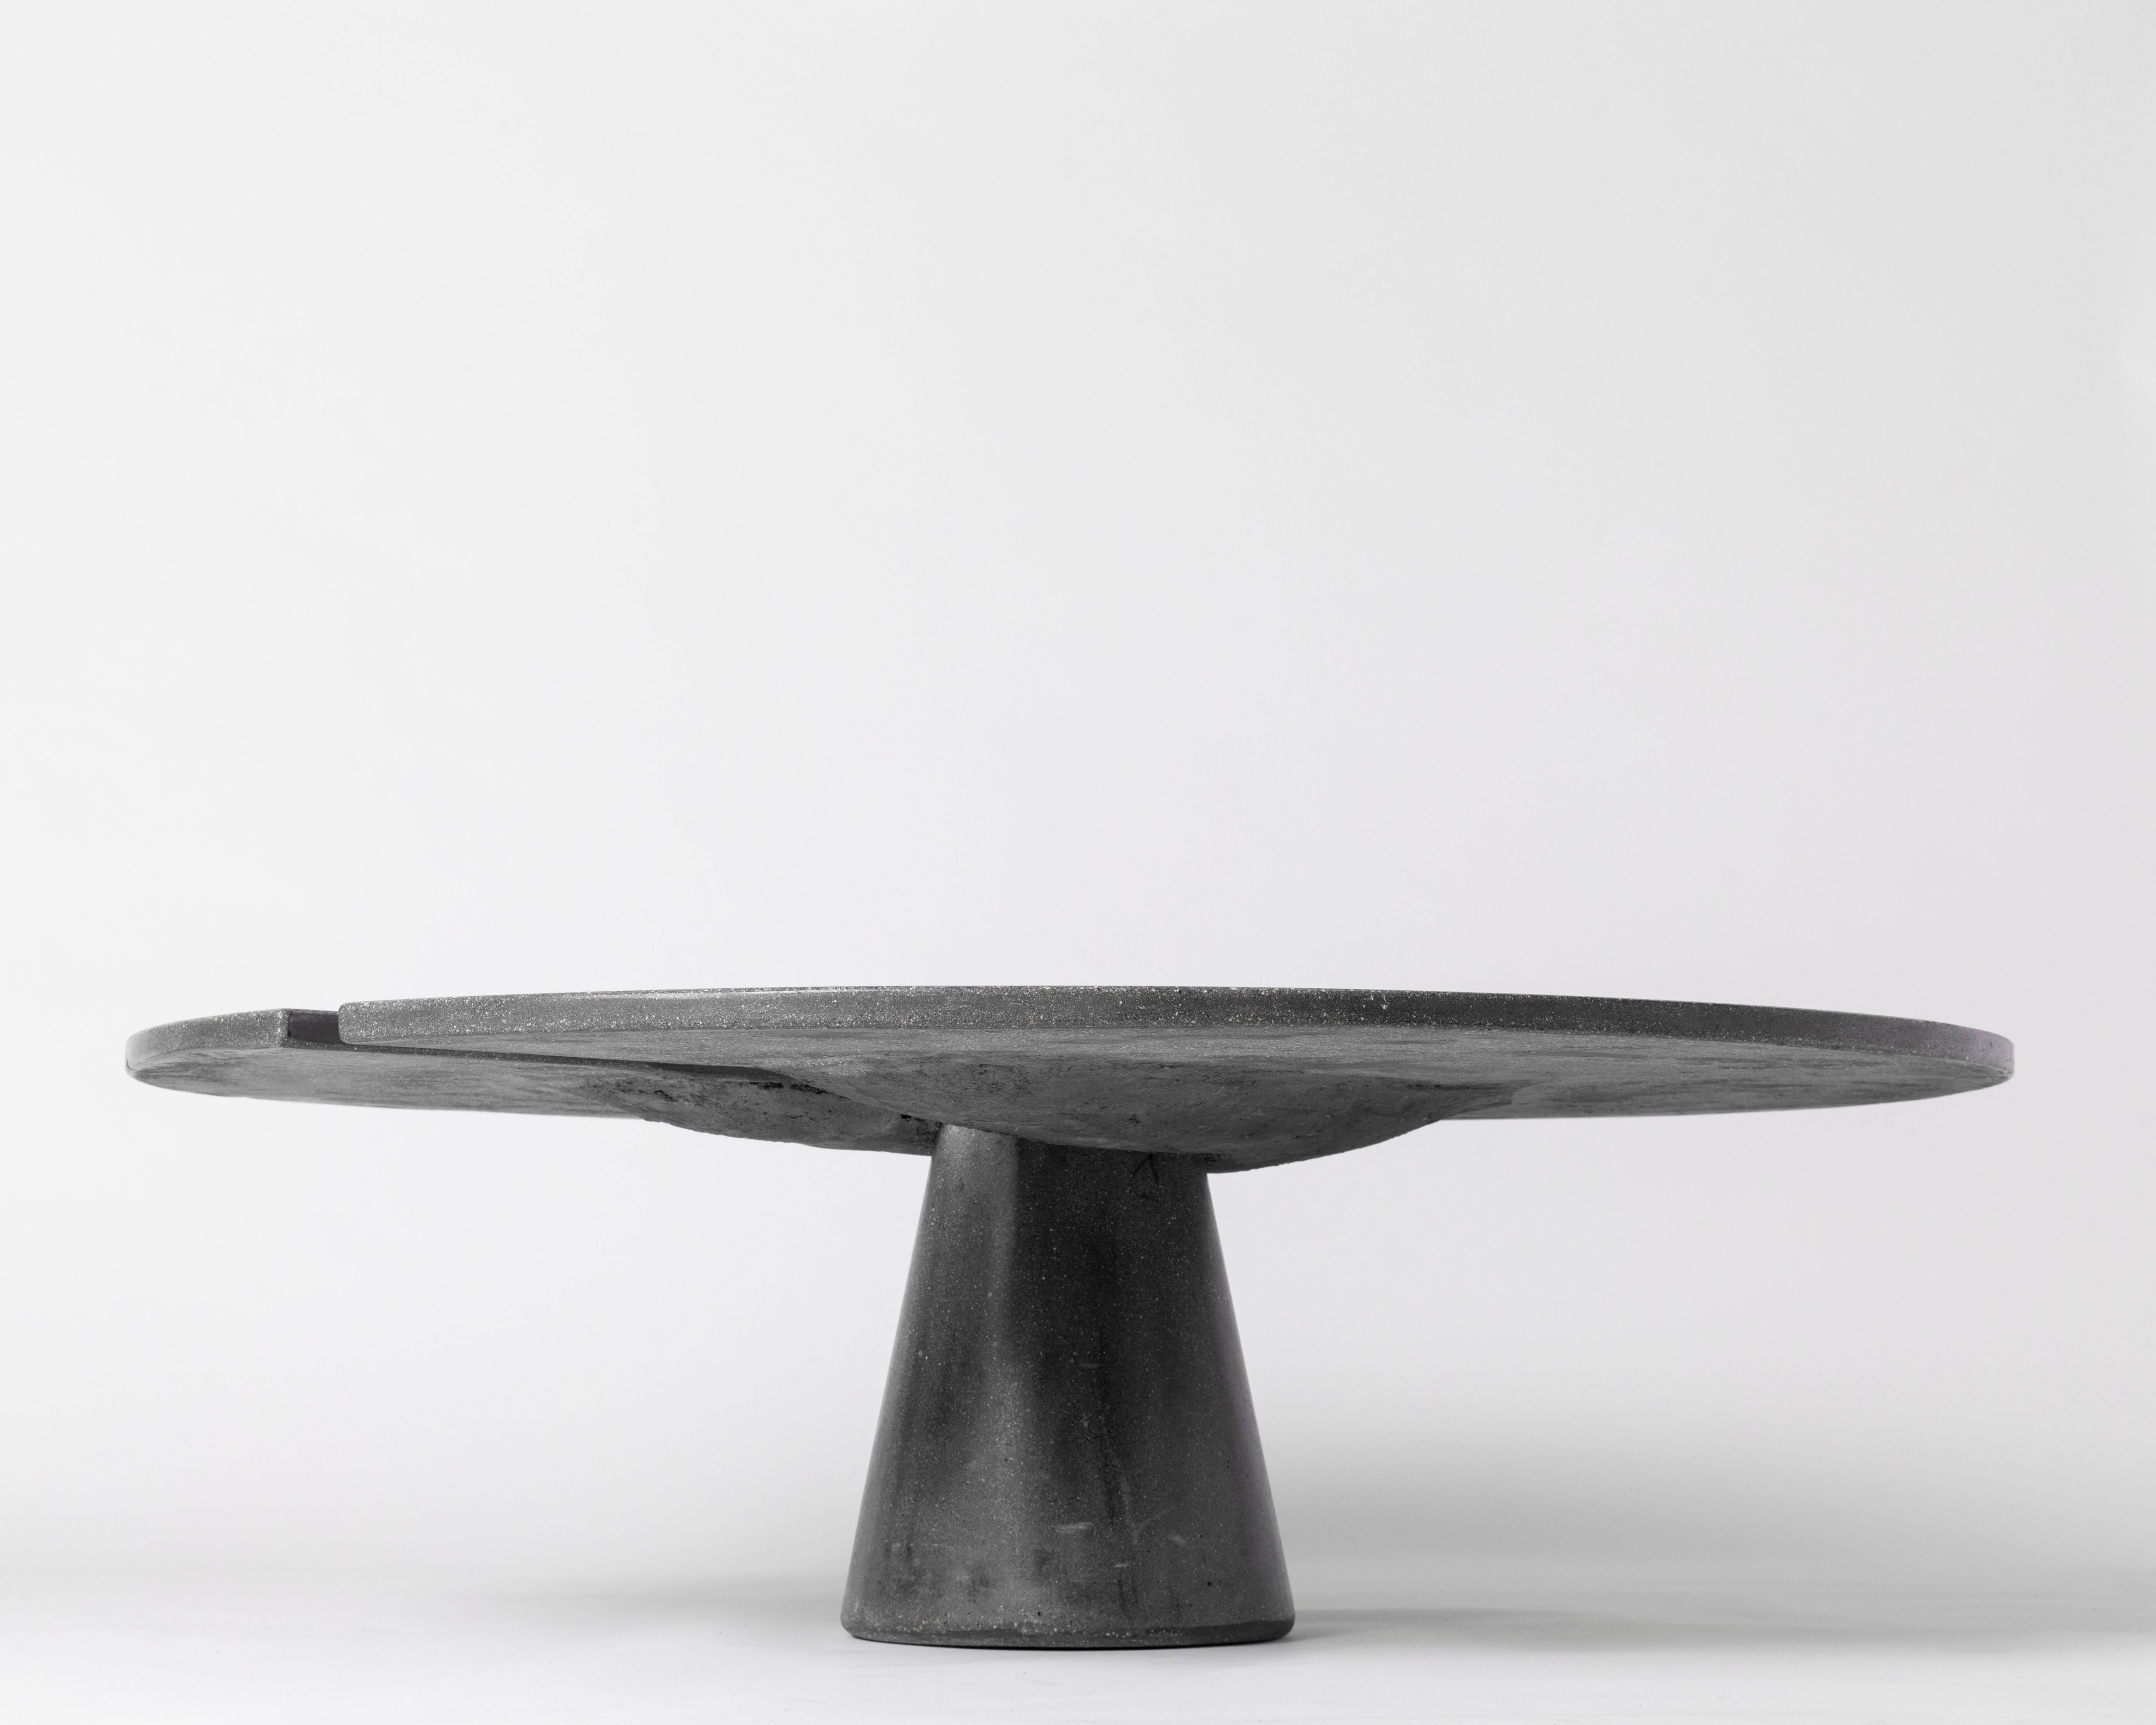 A stylish update to the classic Split Locking table, the straight split locking concrete coffee table features a parallel split radius in the tabletop. Consisting of two pieces: table top and base; lock together by gravity alone. Equal in art and